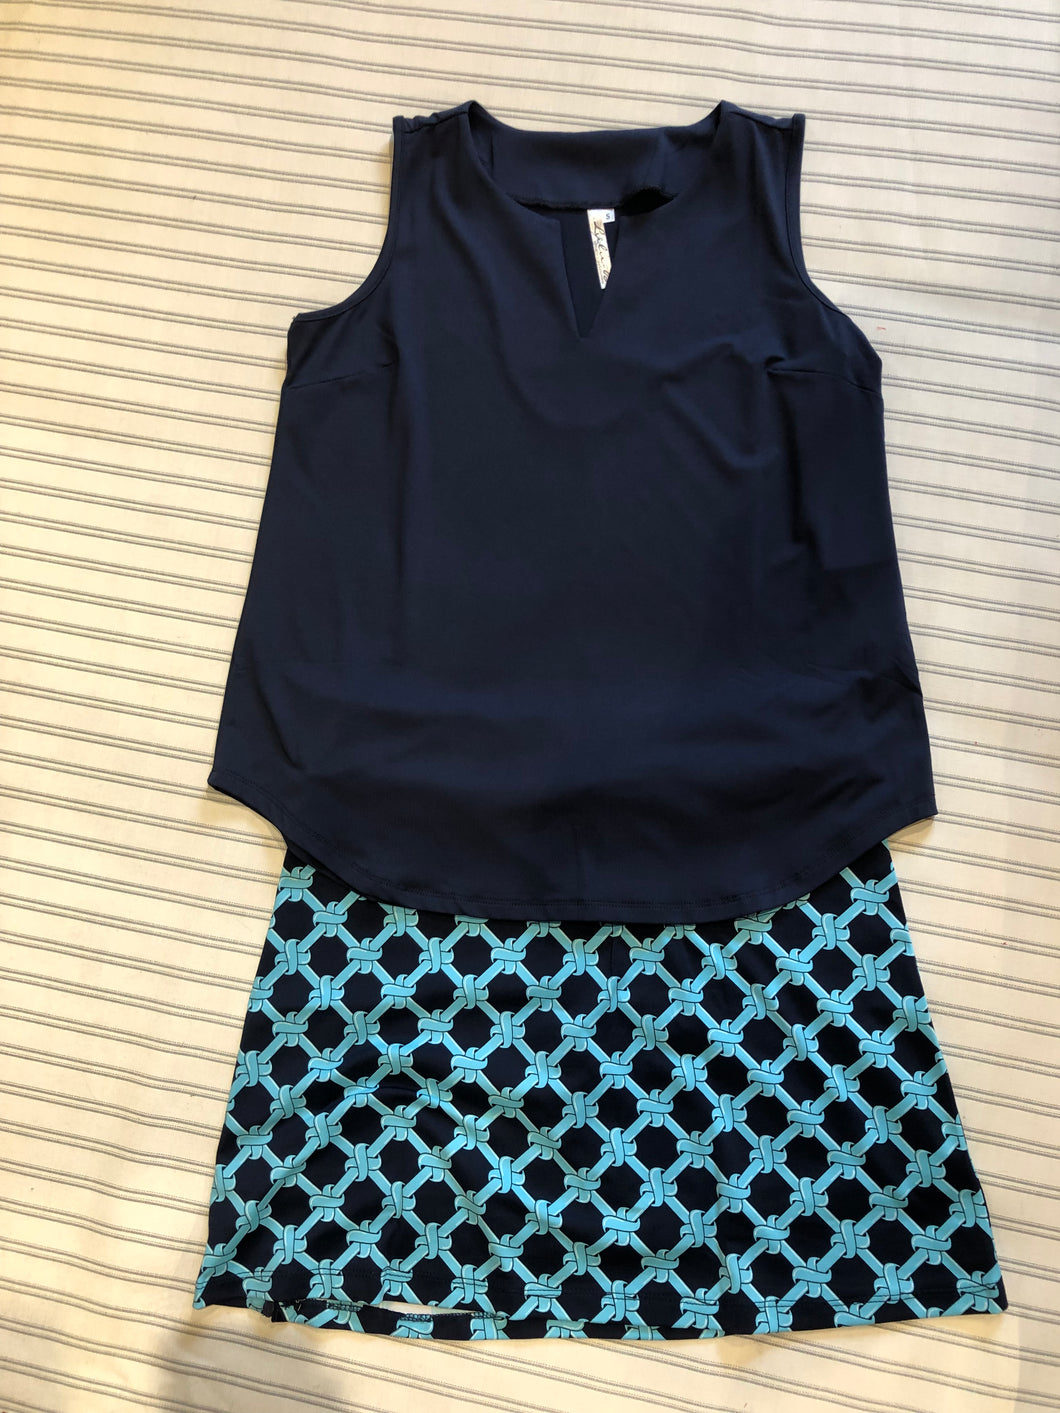 Sandy Navy and Turquoise Knot Pattern Skort SPX 3148